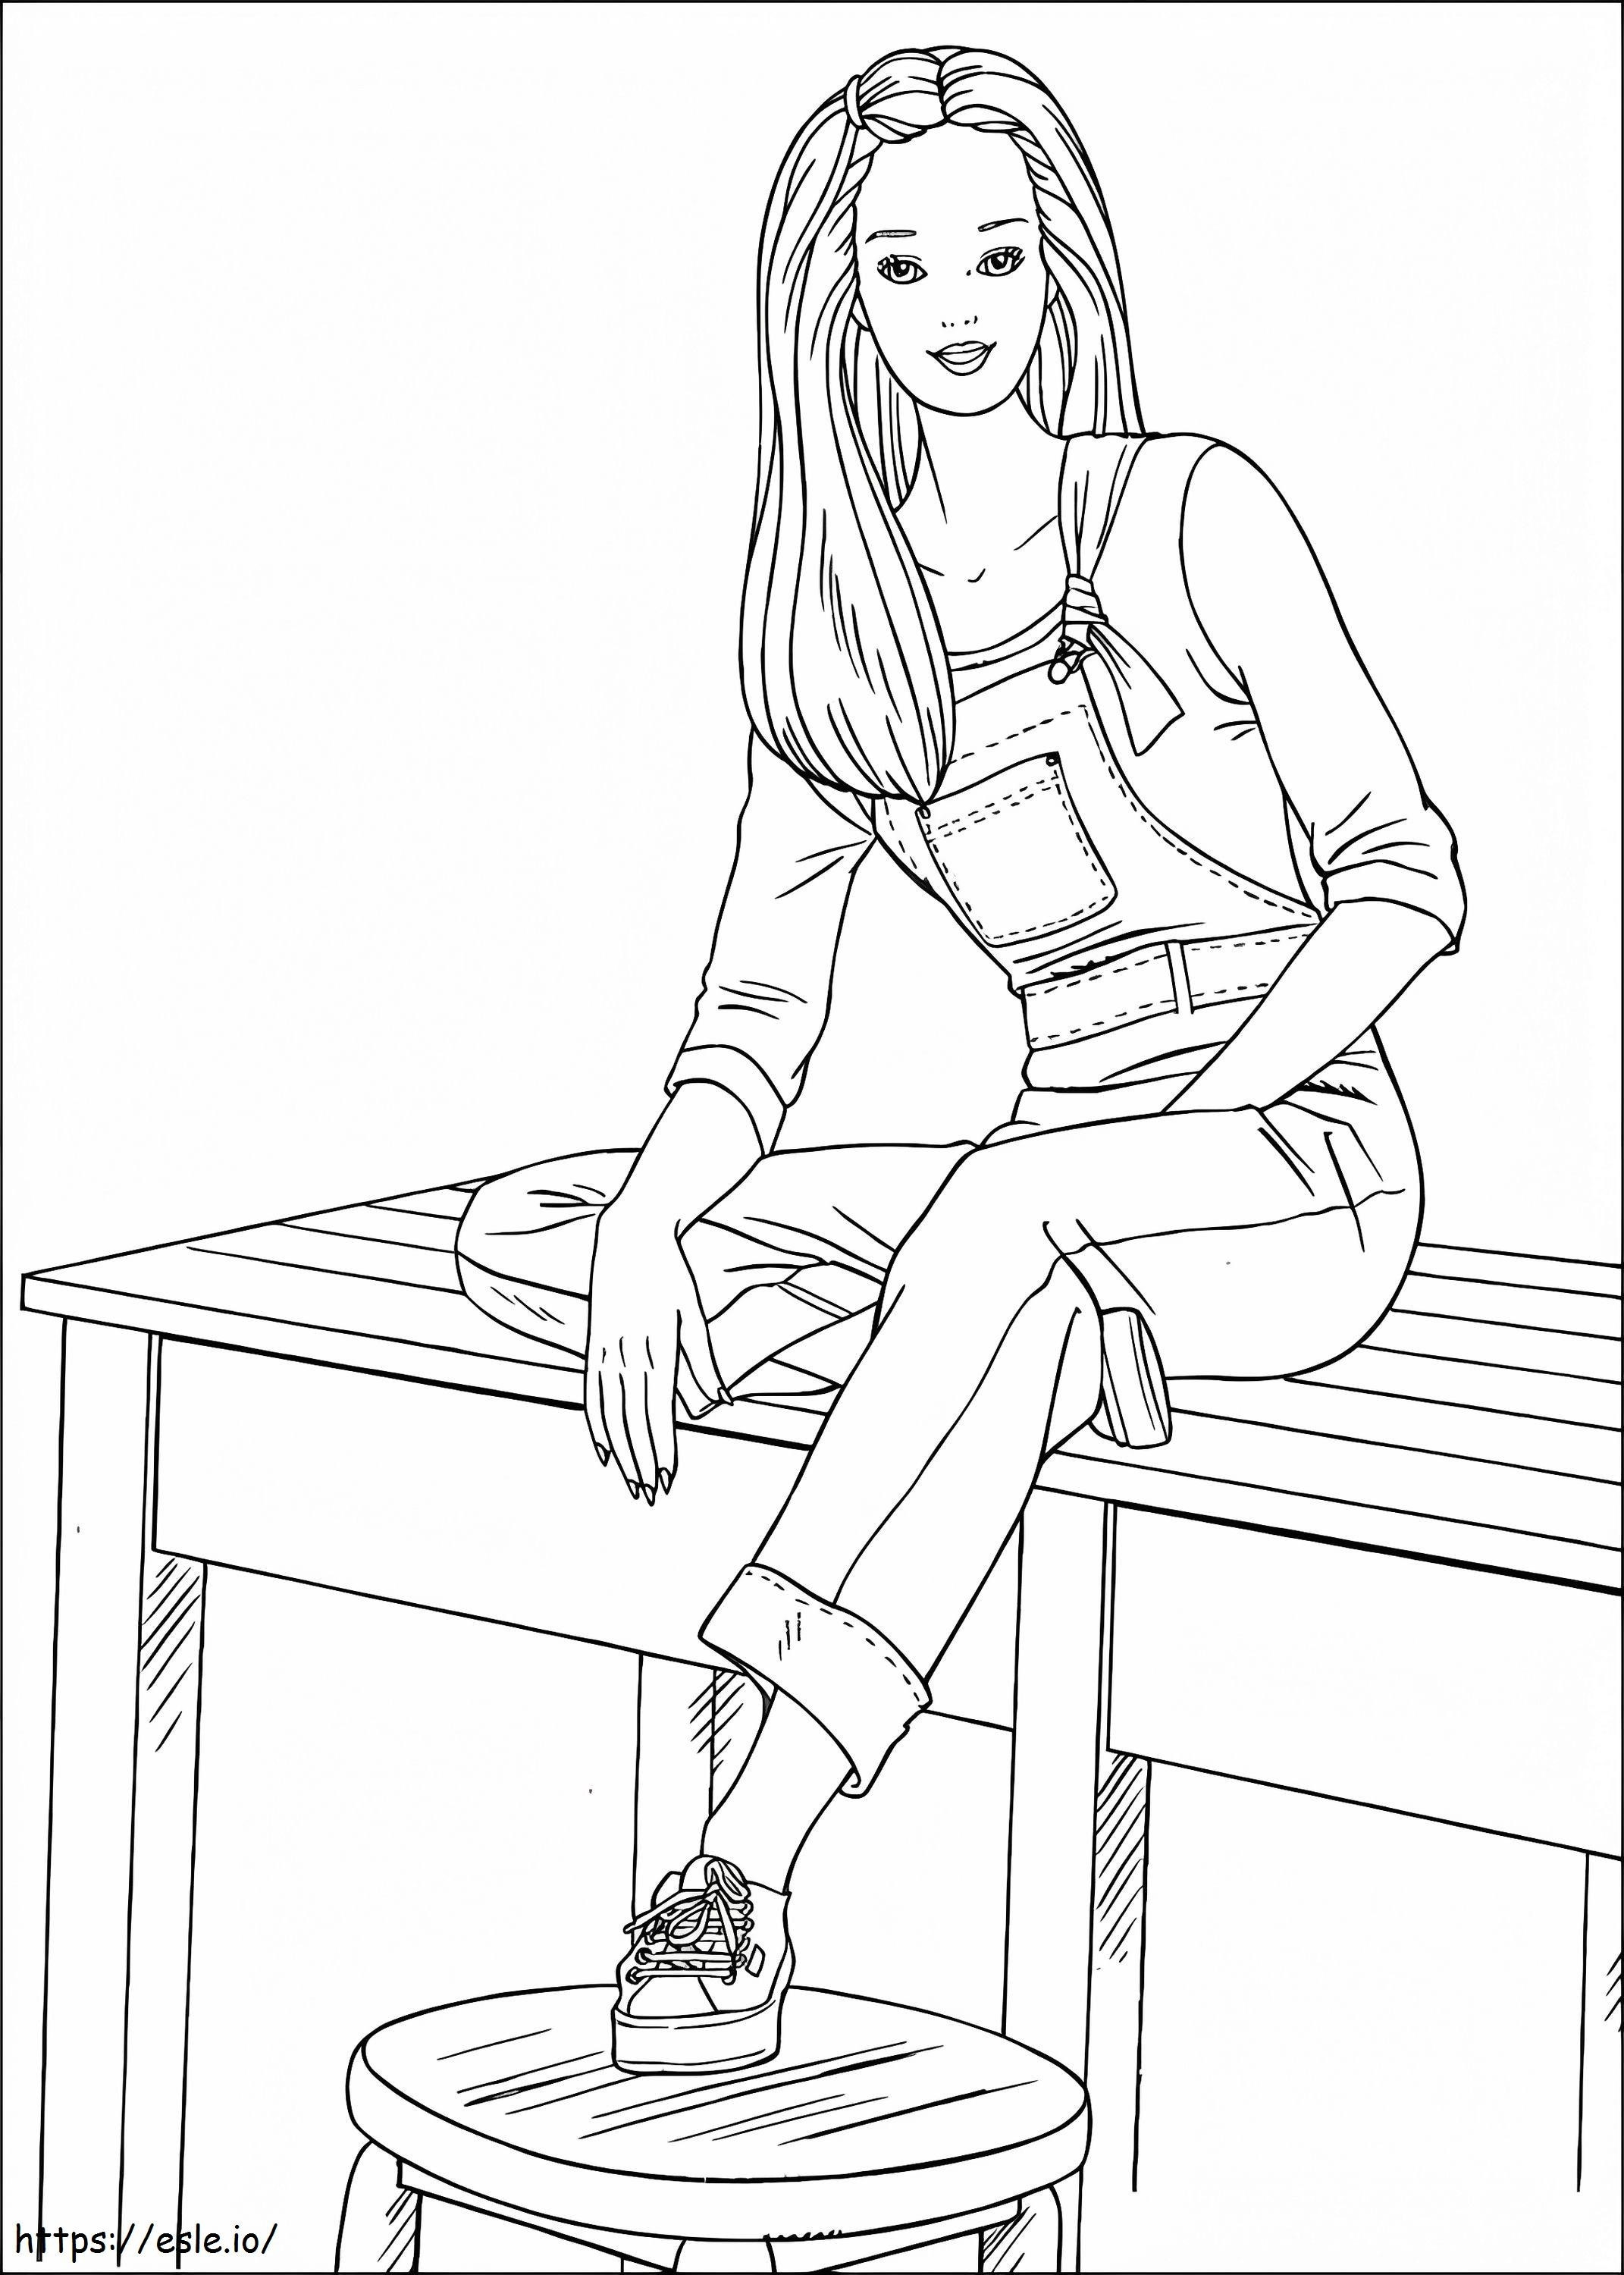 1533783198 Barbie Sitting A4 coloring page